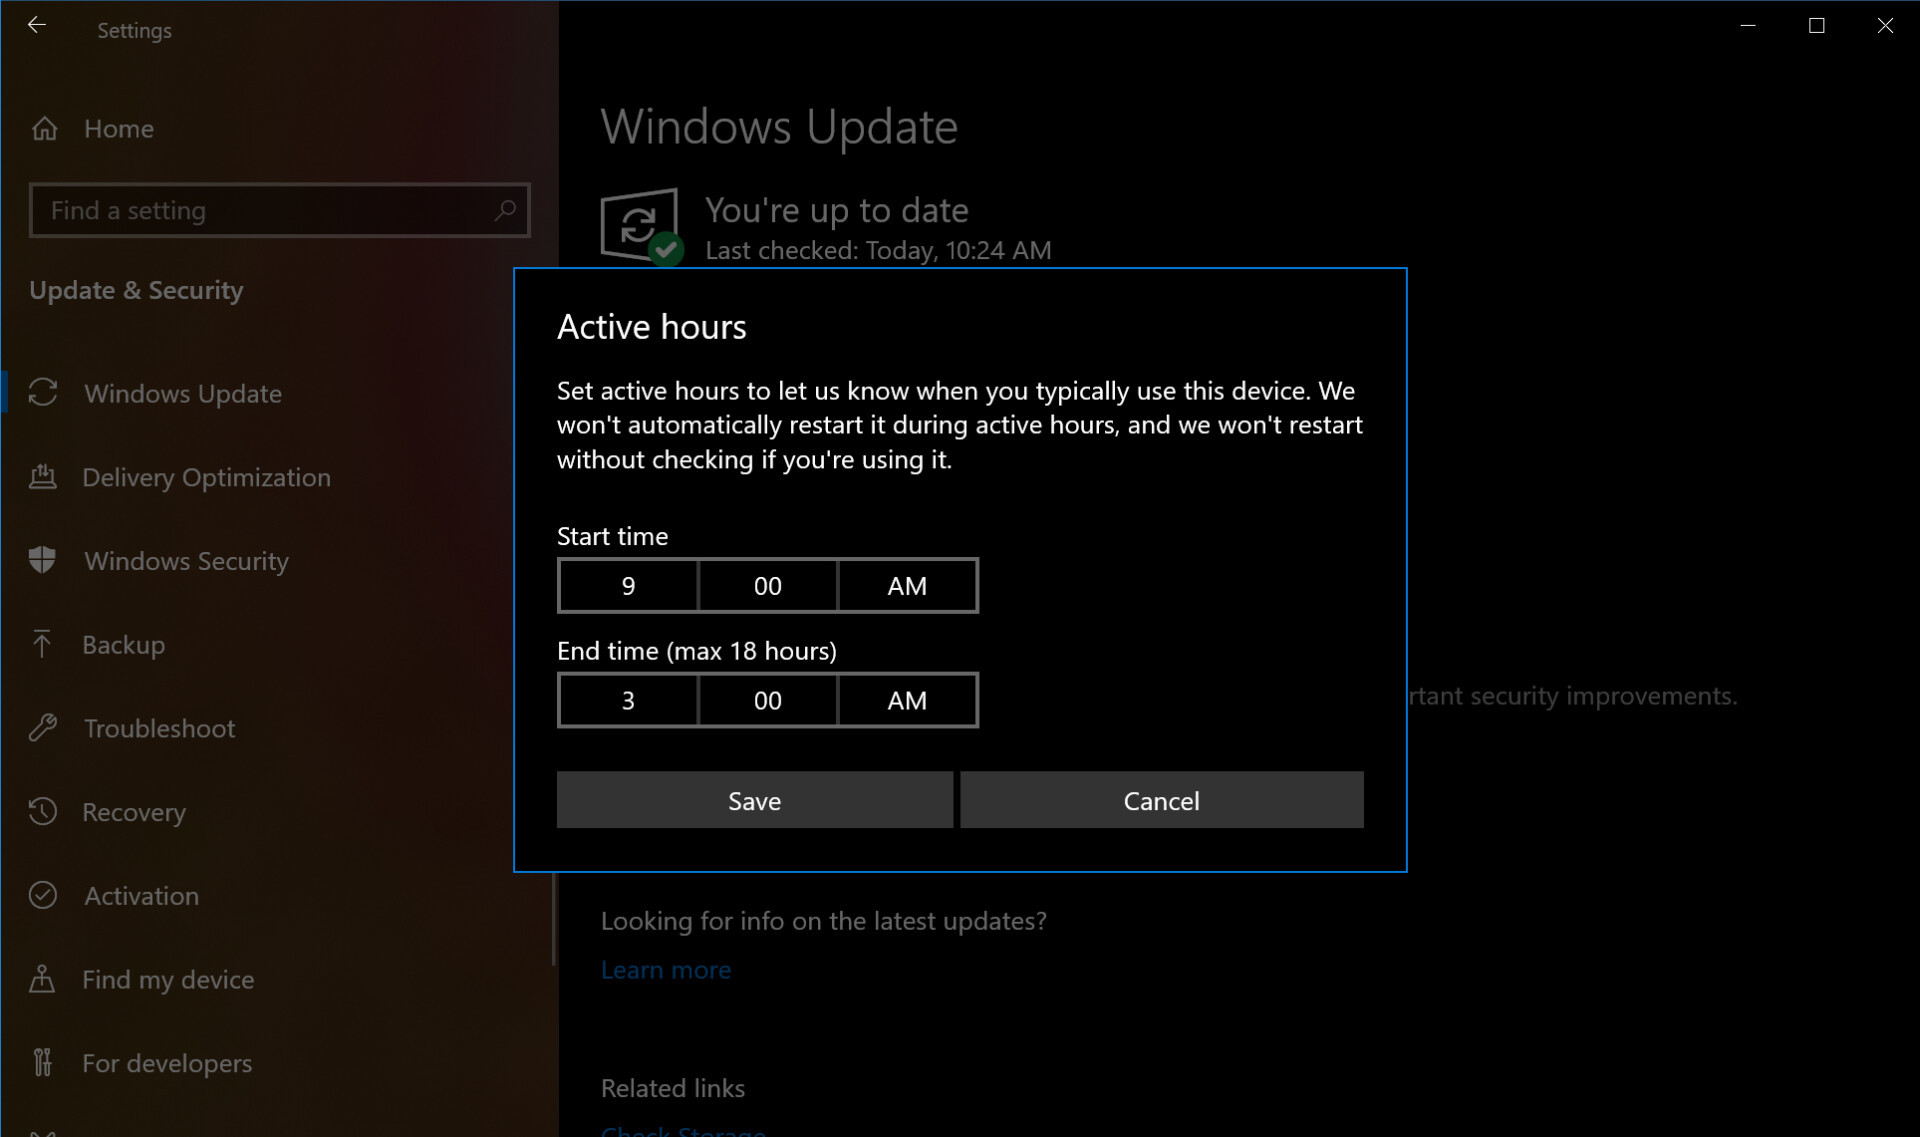 How to update Windows 10